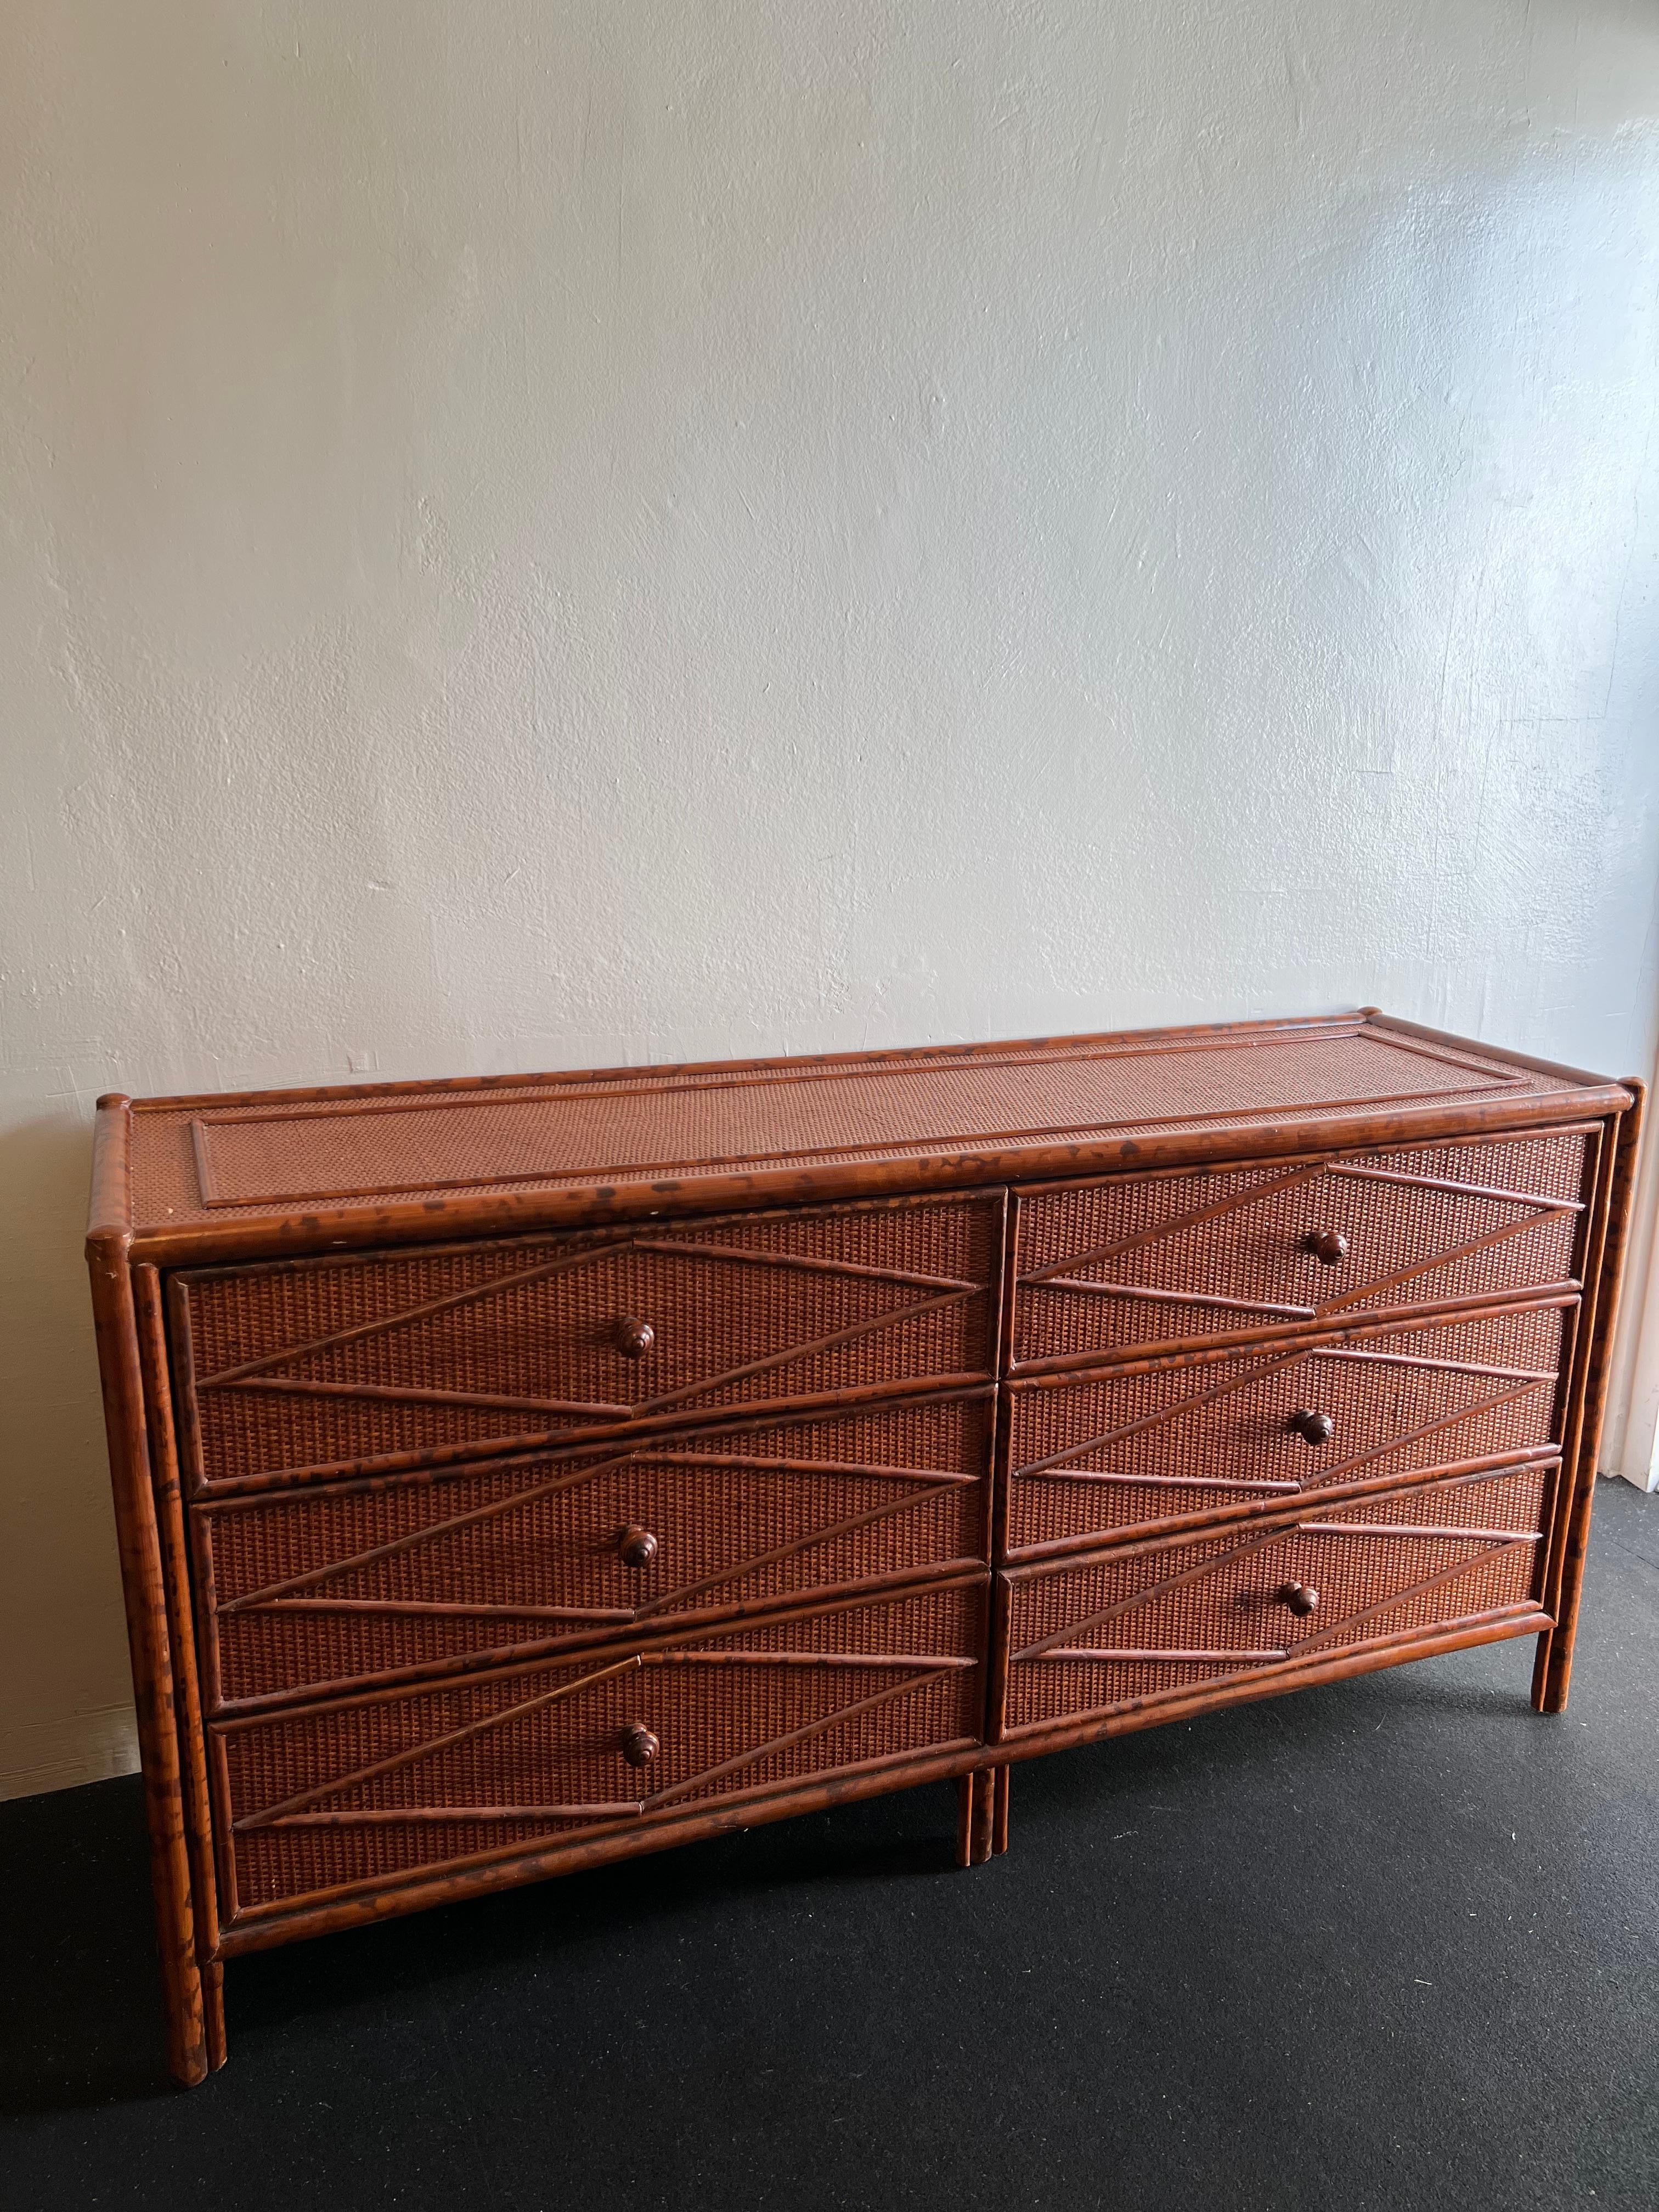 British colonial style burnt bamboo and cane dresser. Signed Bloomingdales. Slight wear to finish of cane (please refer to photos). Additional photos available upon request. 

Would work well in a variety of interiors such as modern, mid century